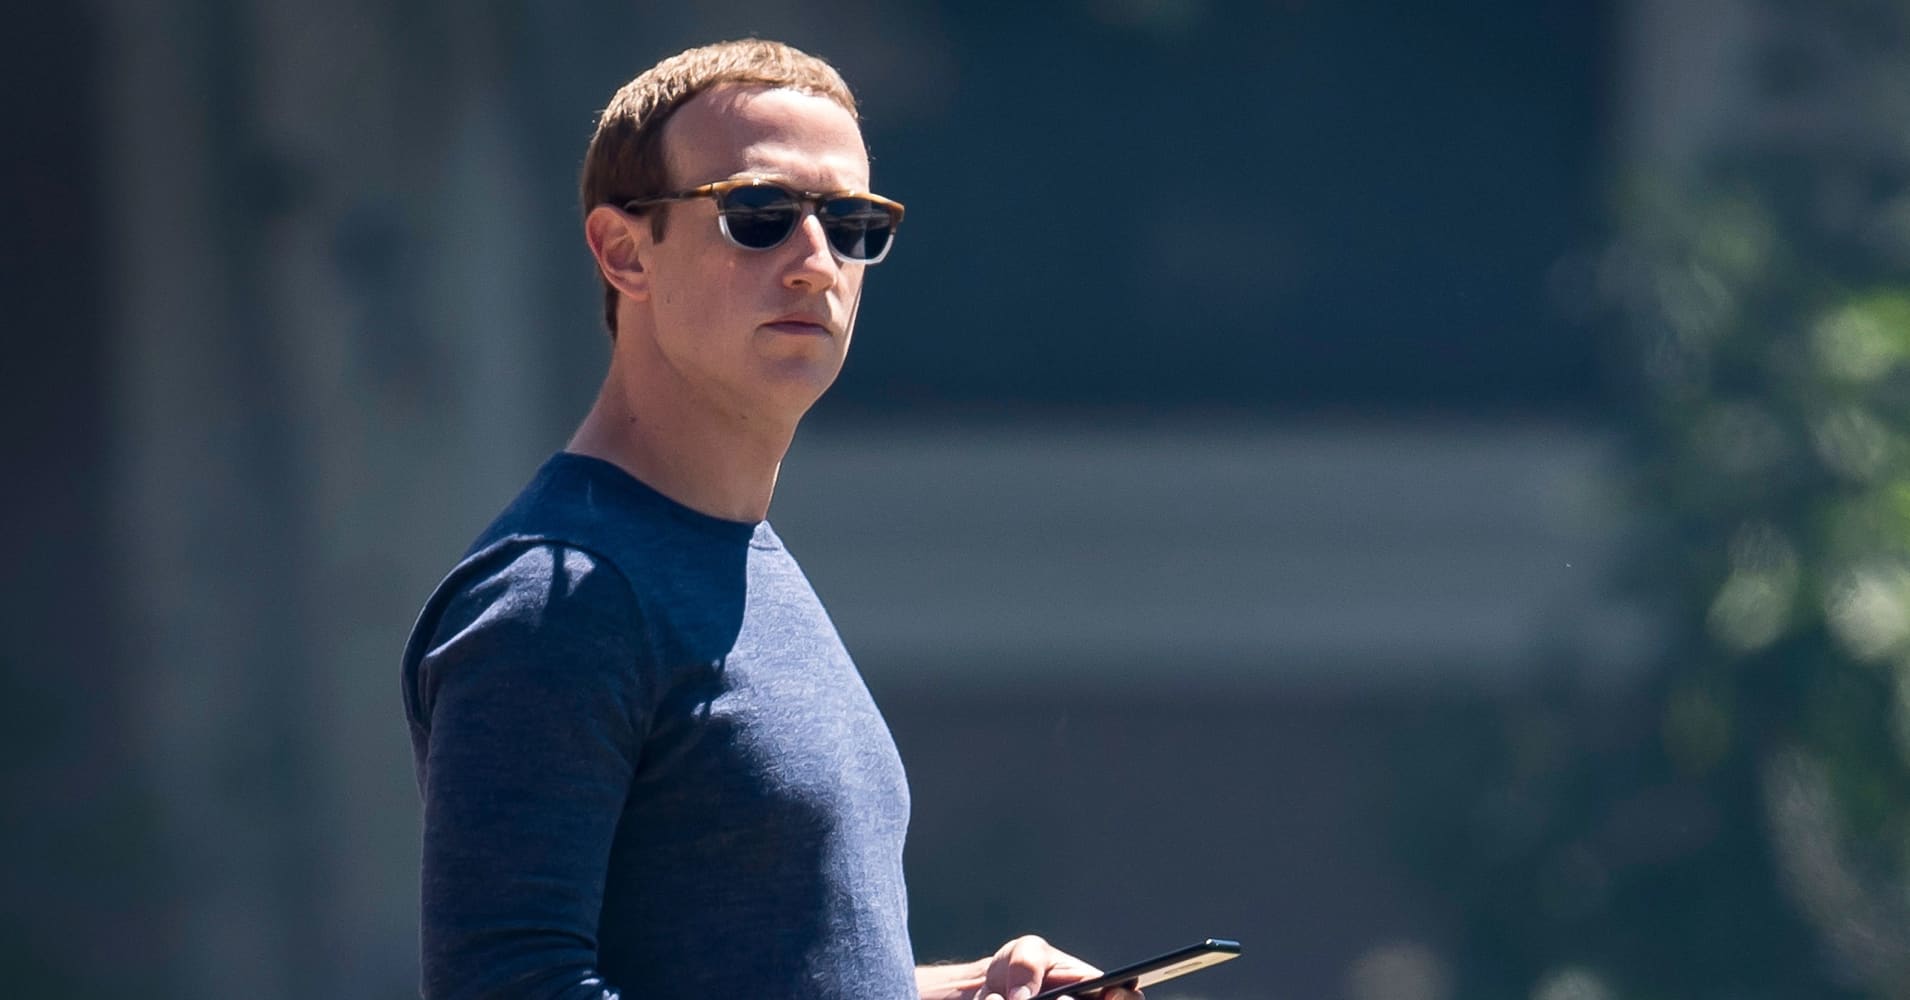 Facebook employees had access to millions of user passwords